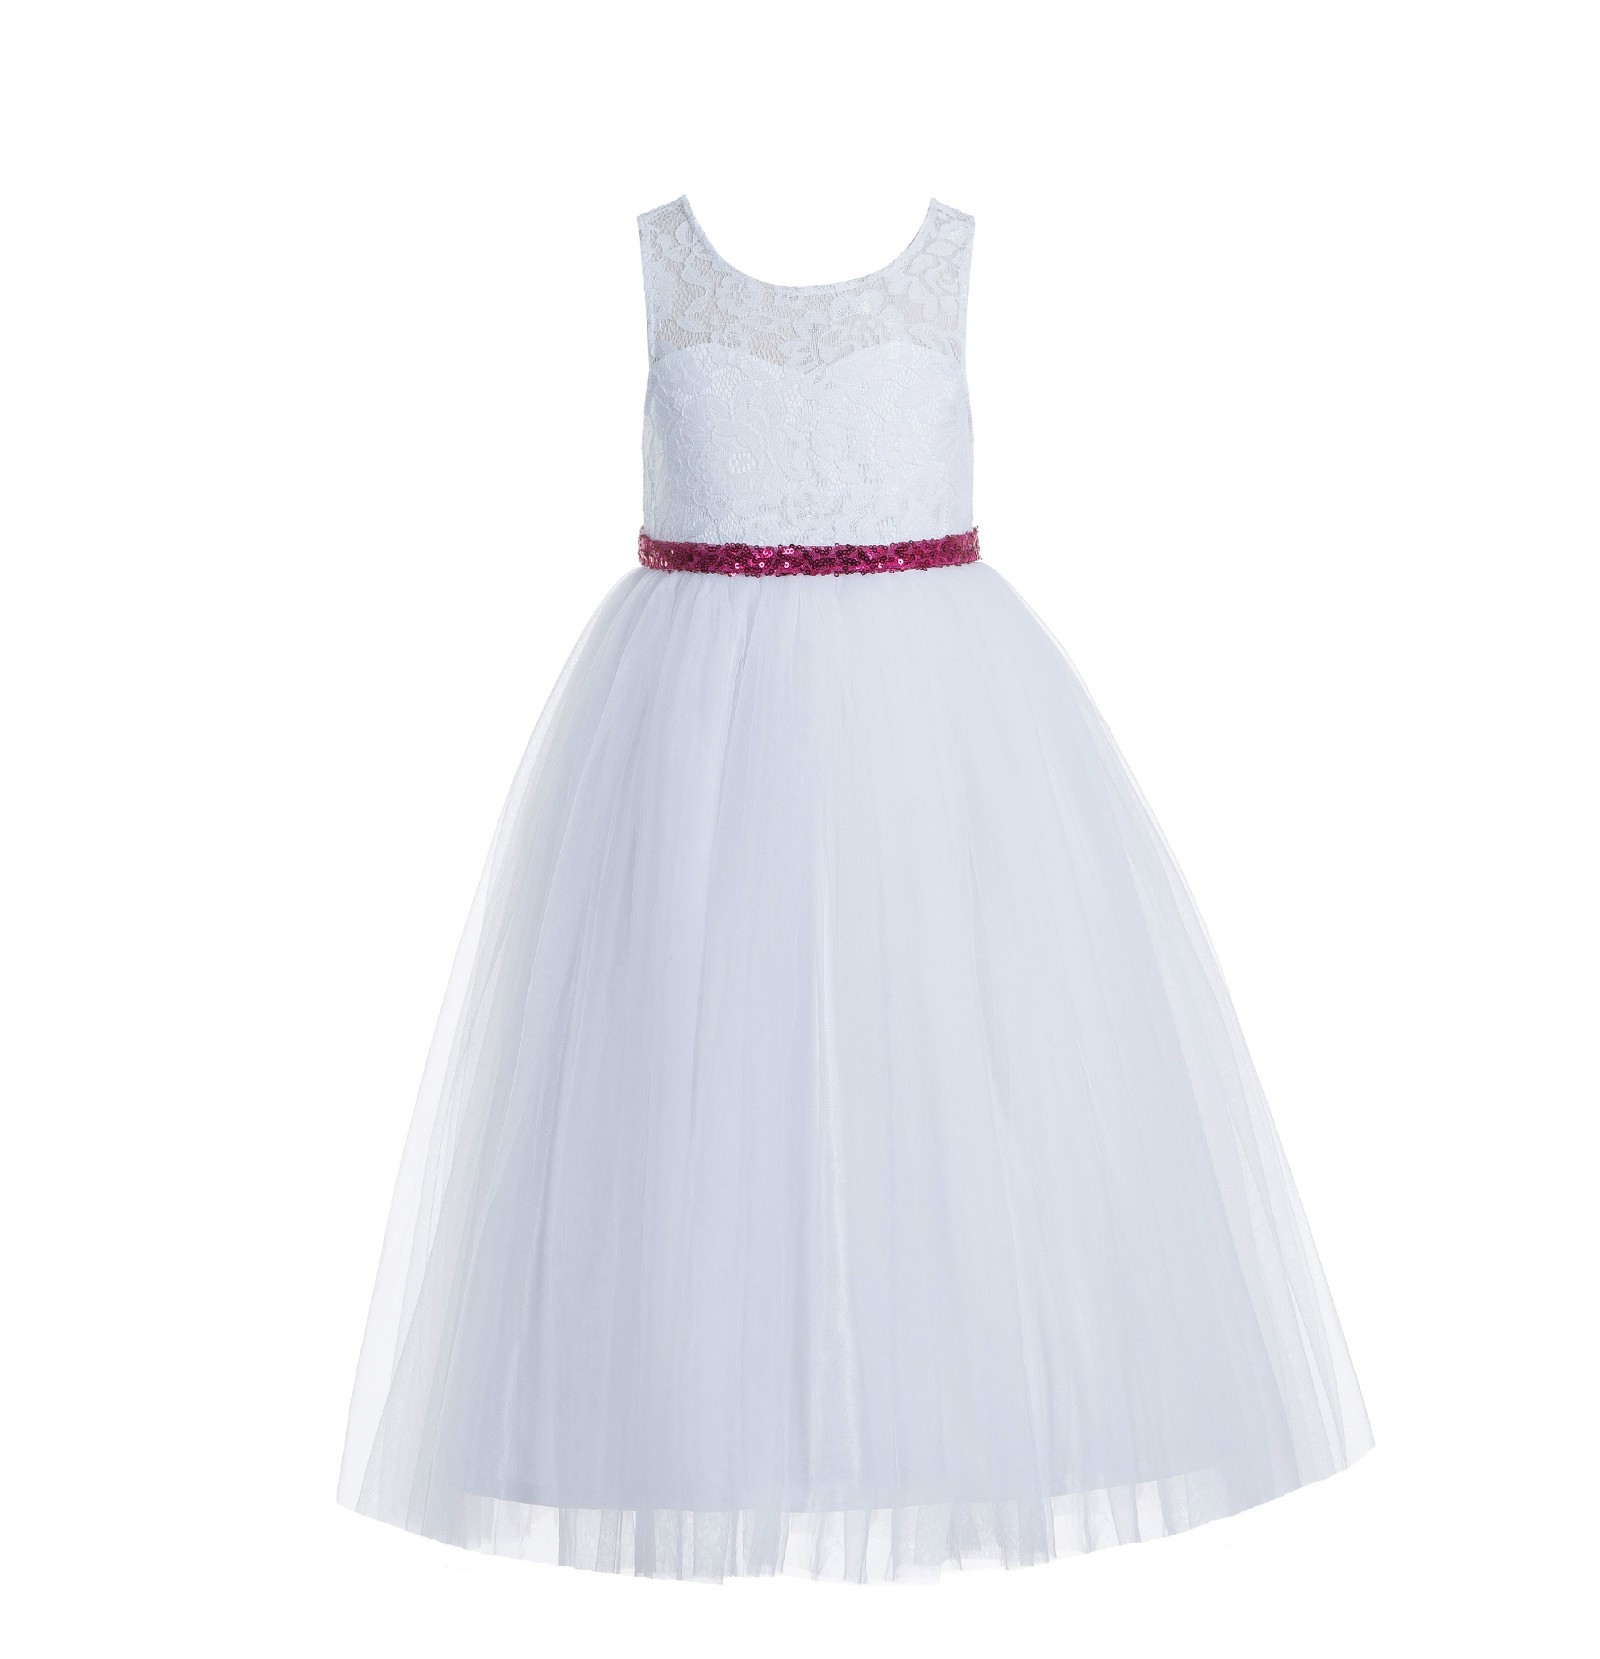 White / Fuchsia Pink Lace Tulle Scoop Neck Keyhole Back A-Line Flower Girl Dress 178